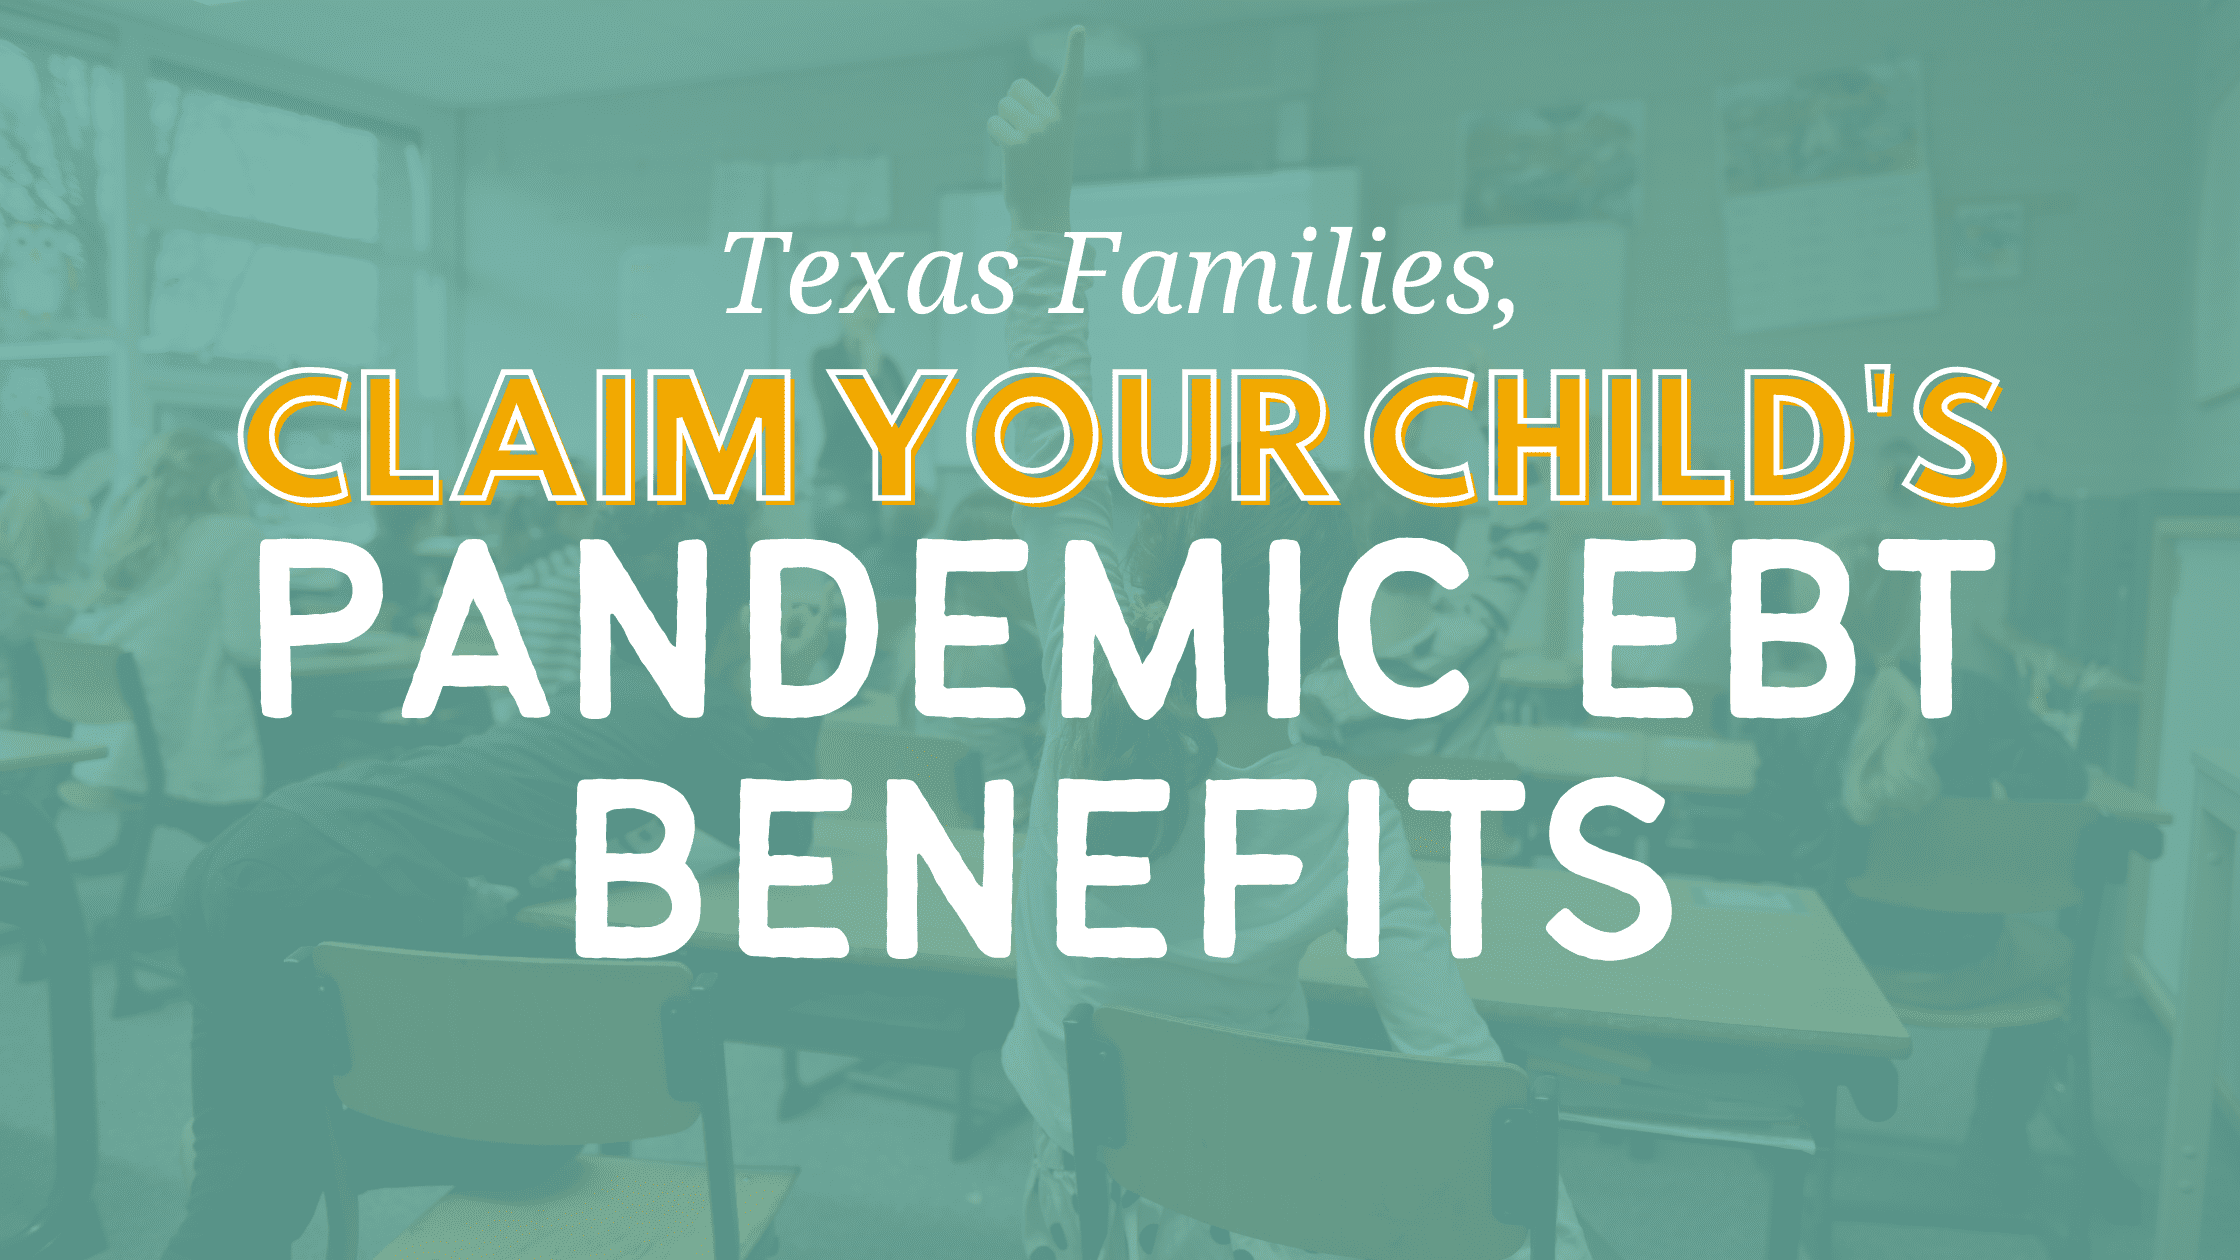 Texas Families, Claim Your Child’s Pandemic EBT Benefits Every Texan